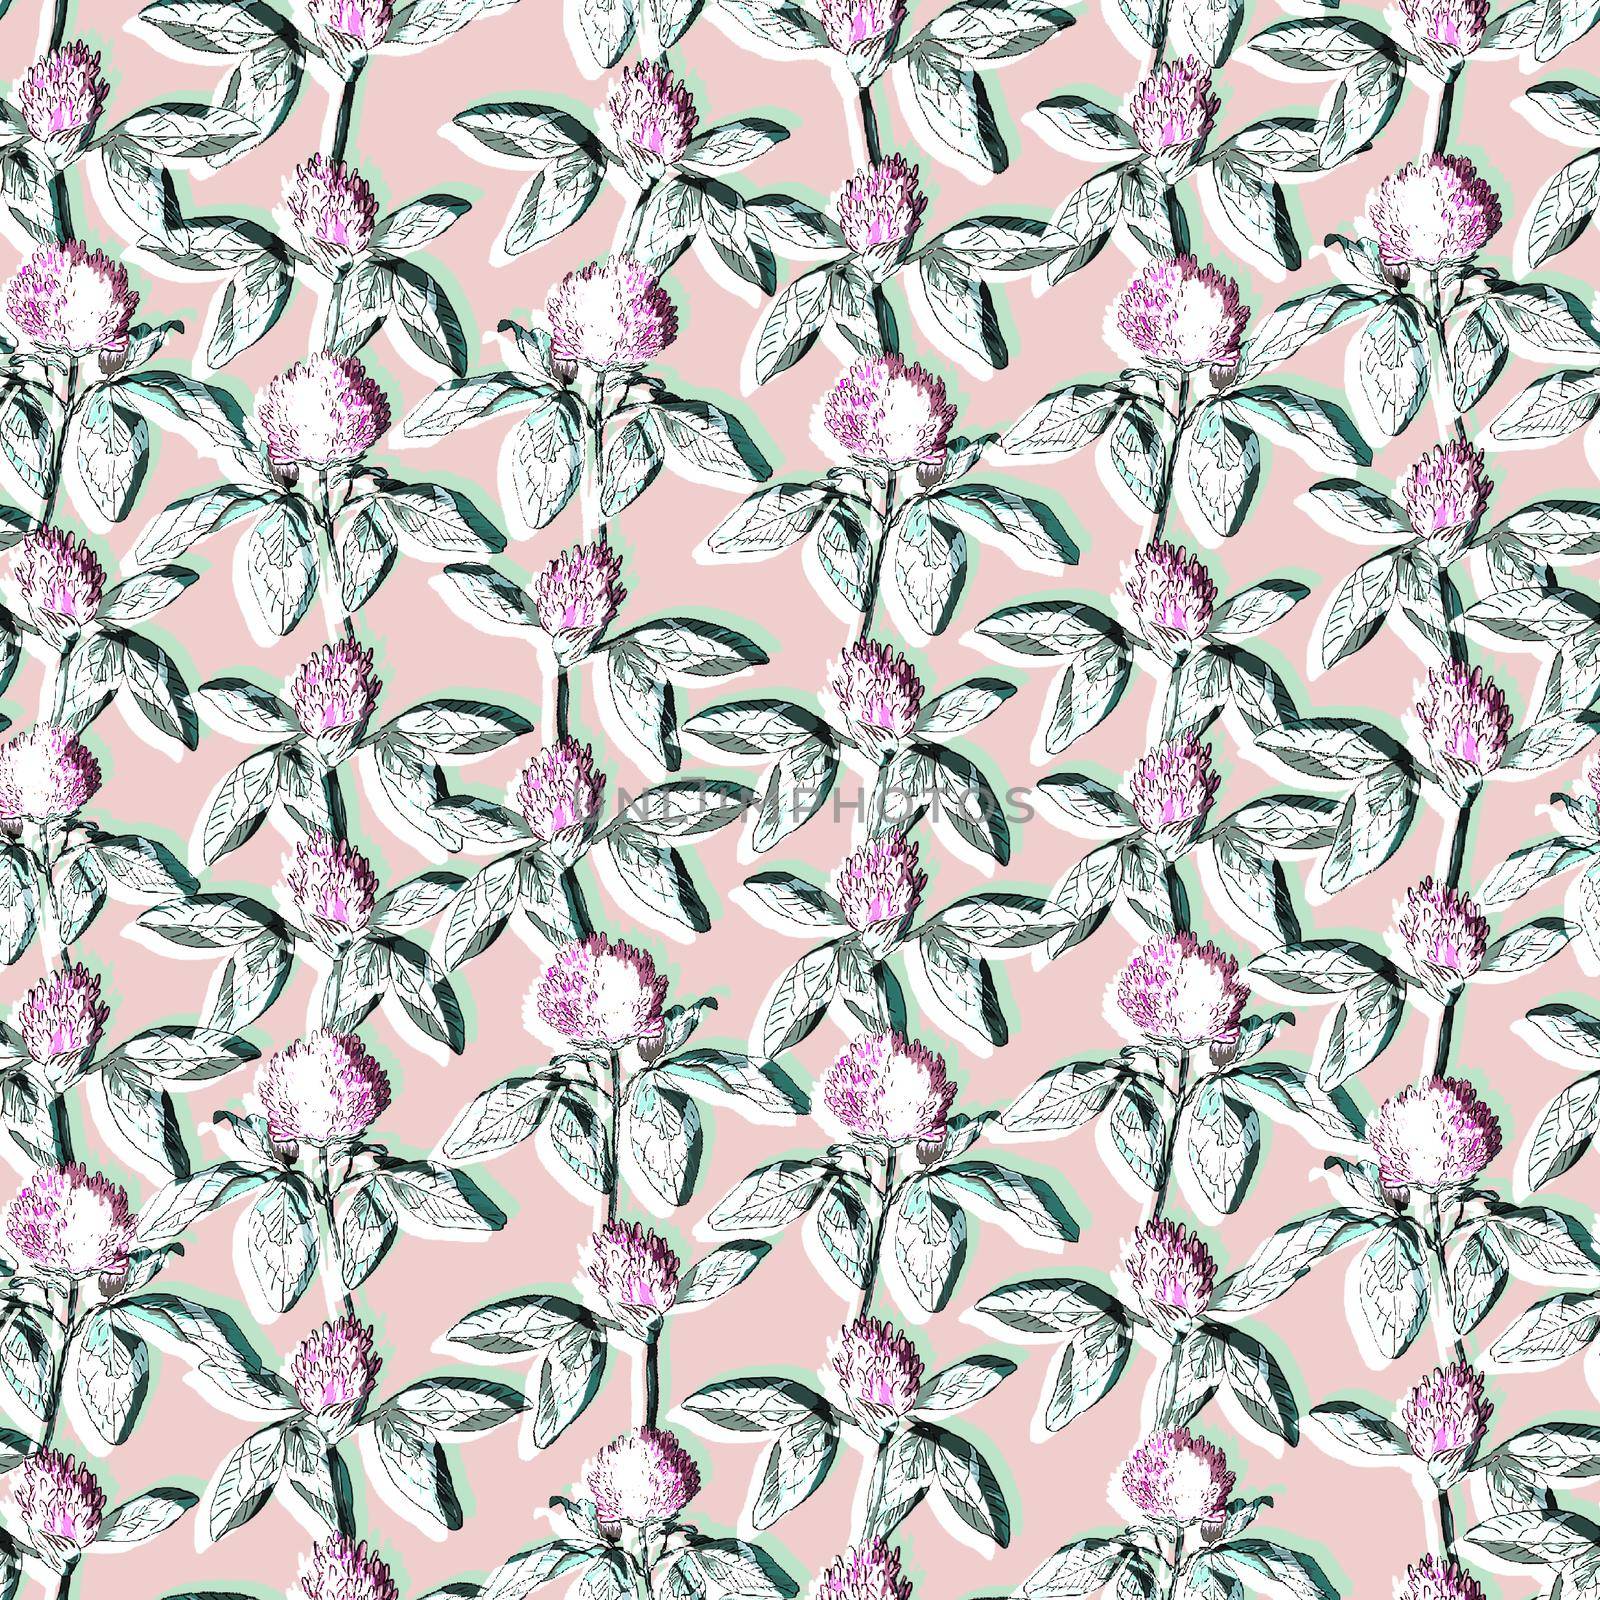 Clover leaf and flowers hand drawn seamless pattern graphic illustration.